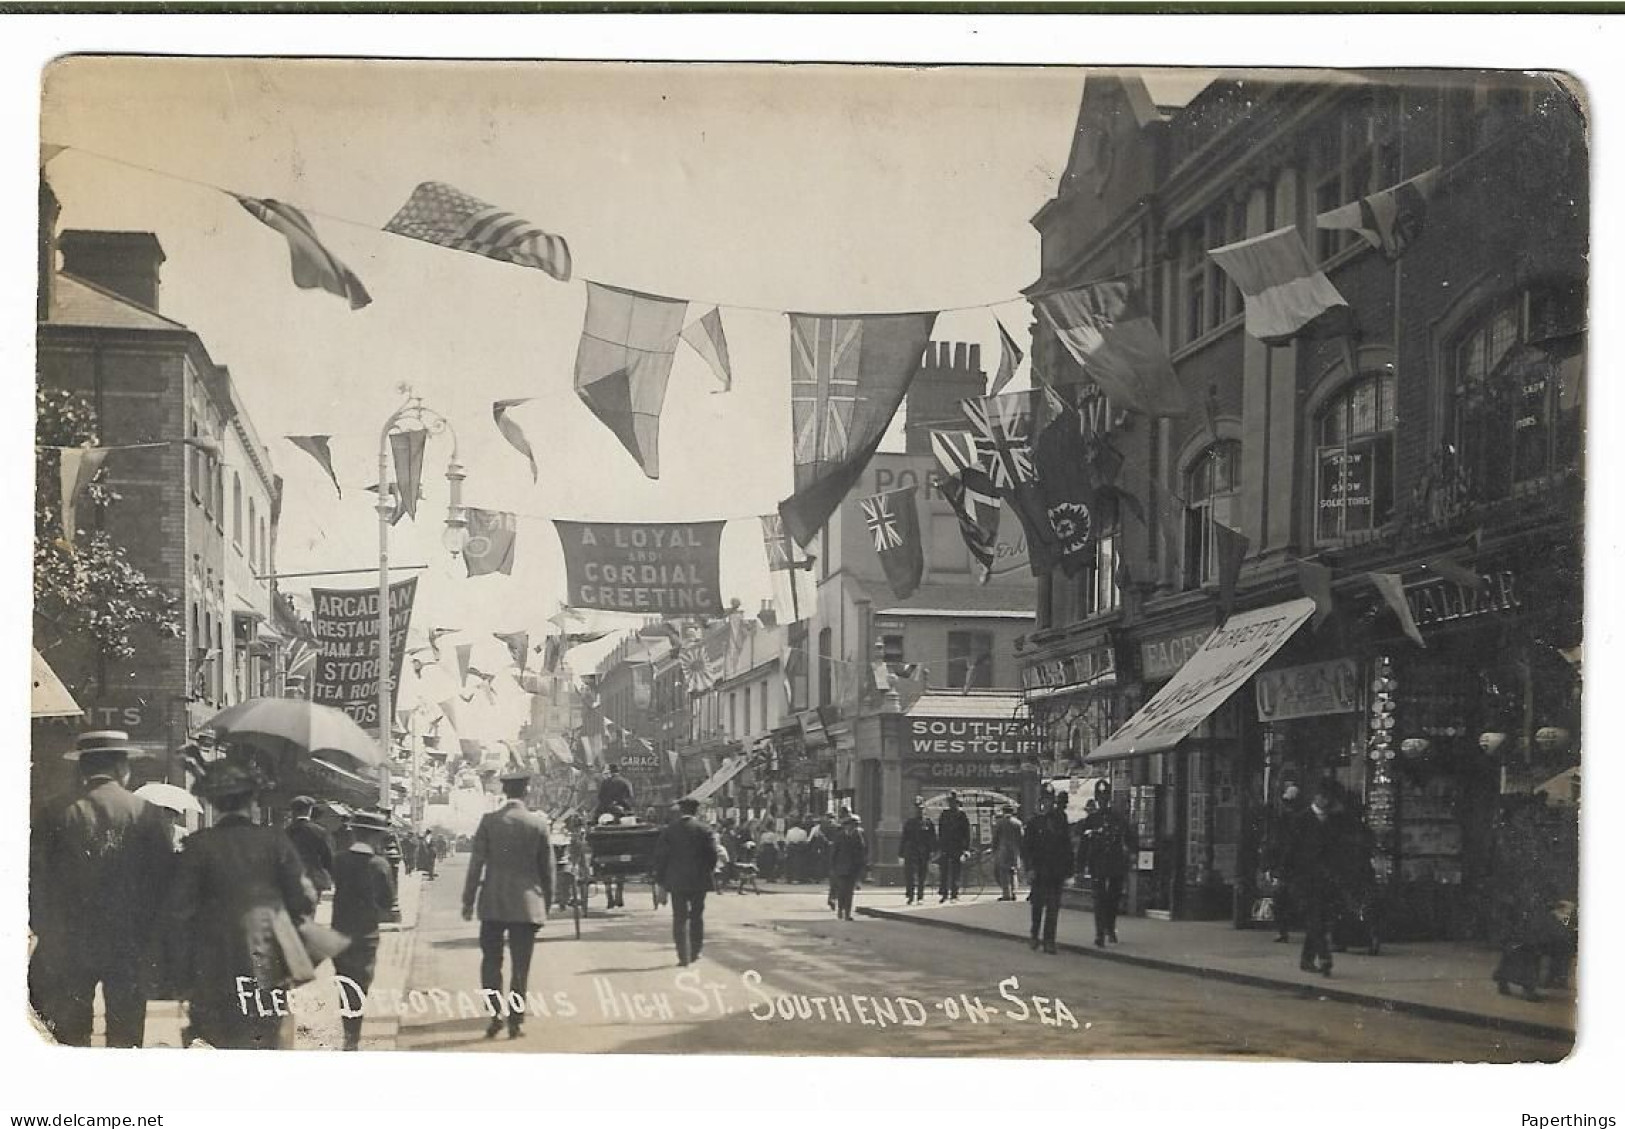 Real Photo Postcard, Essex, Southend-on Sea, High Street, Fleet Decorations, Flags, Military, Police, Shops, Early 1900s - Southend, Westcliff & Leigh